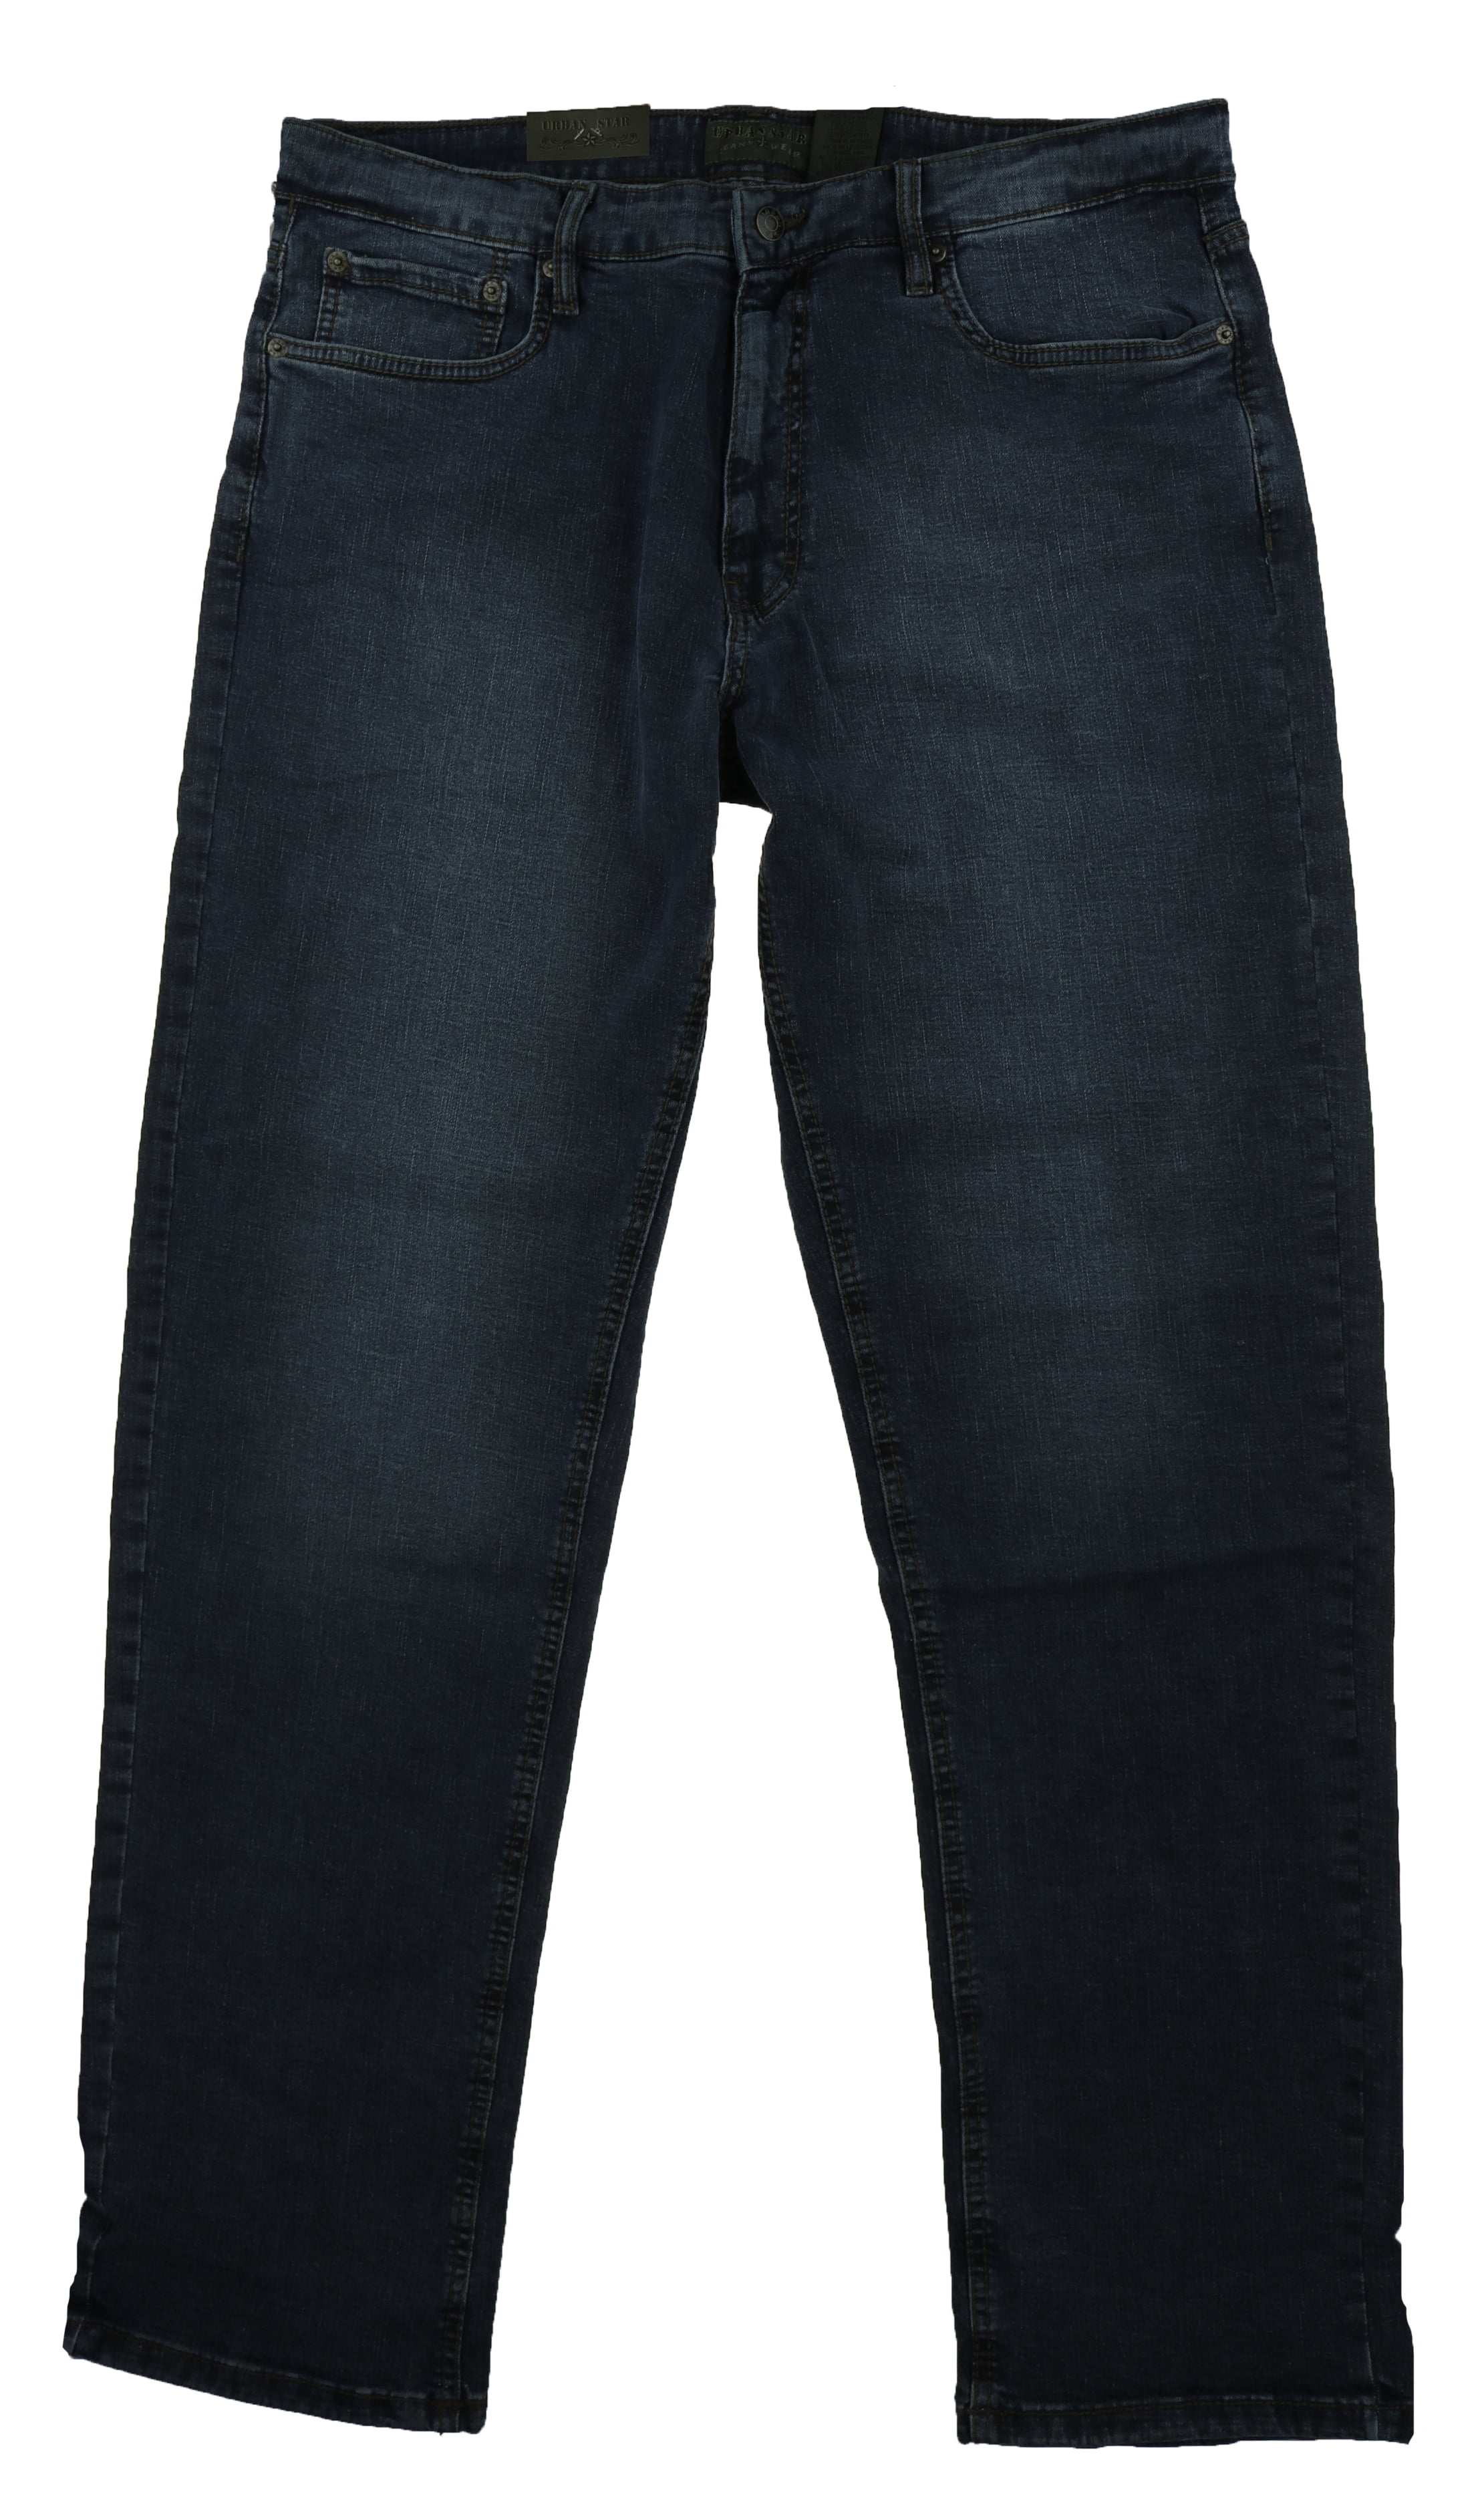 urban star men's relaxed fit jean